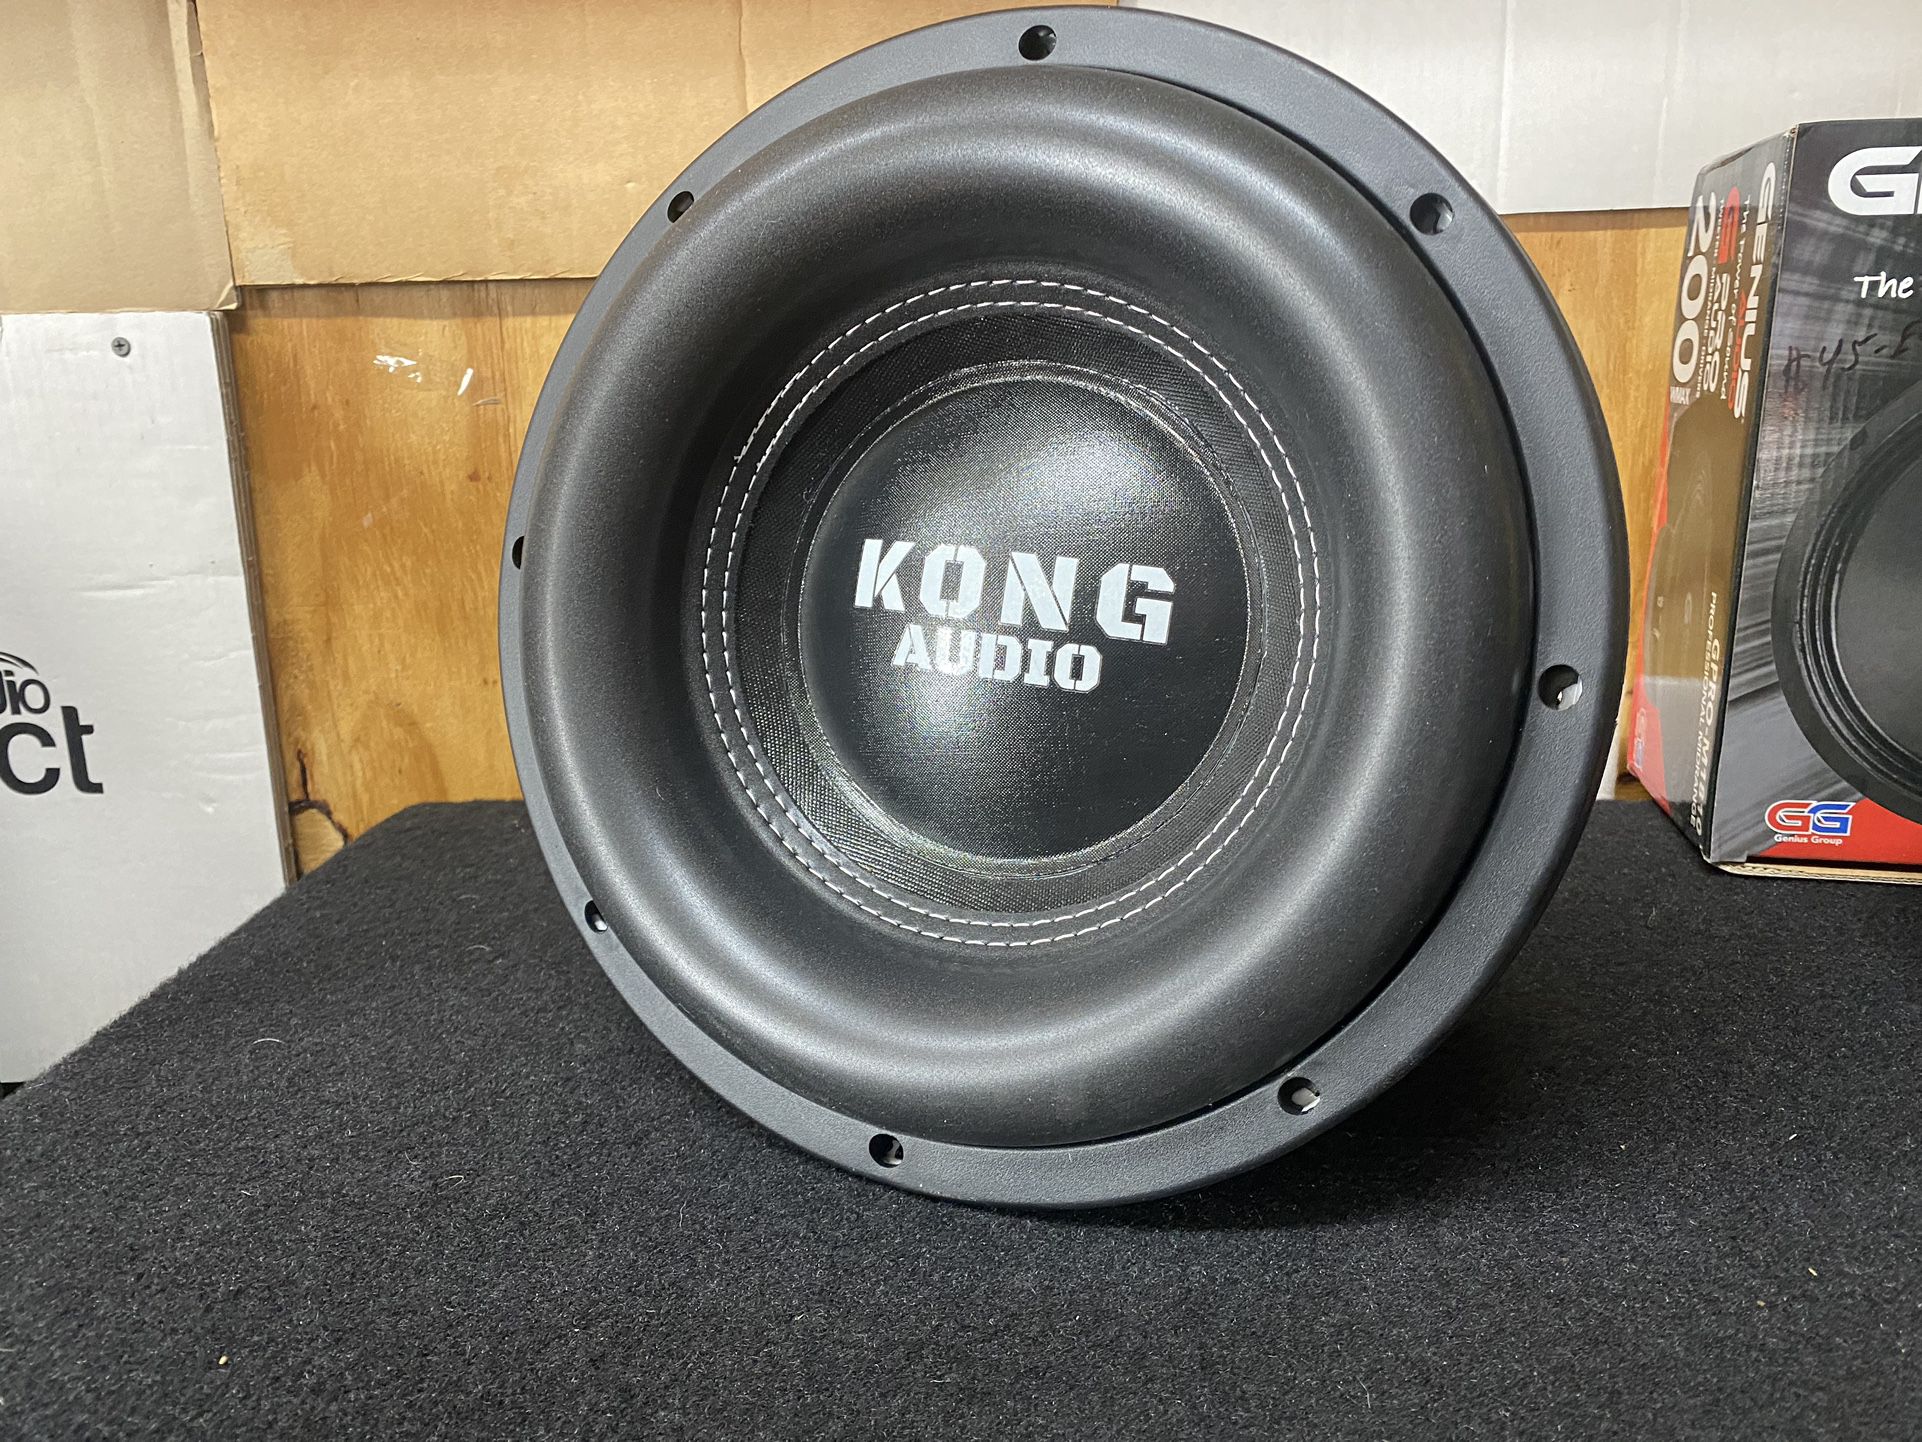 Sold Out New 12" Kong Audio 4000w Max High Power Subwoofer  $300 Each  